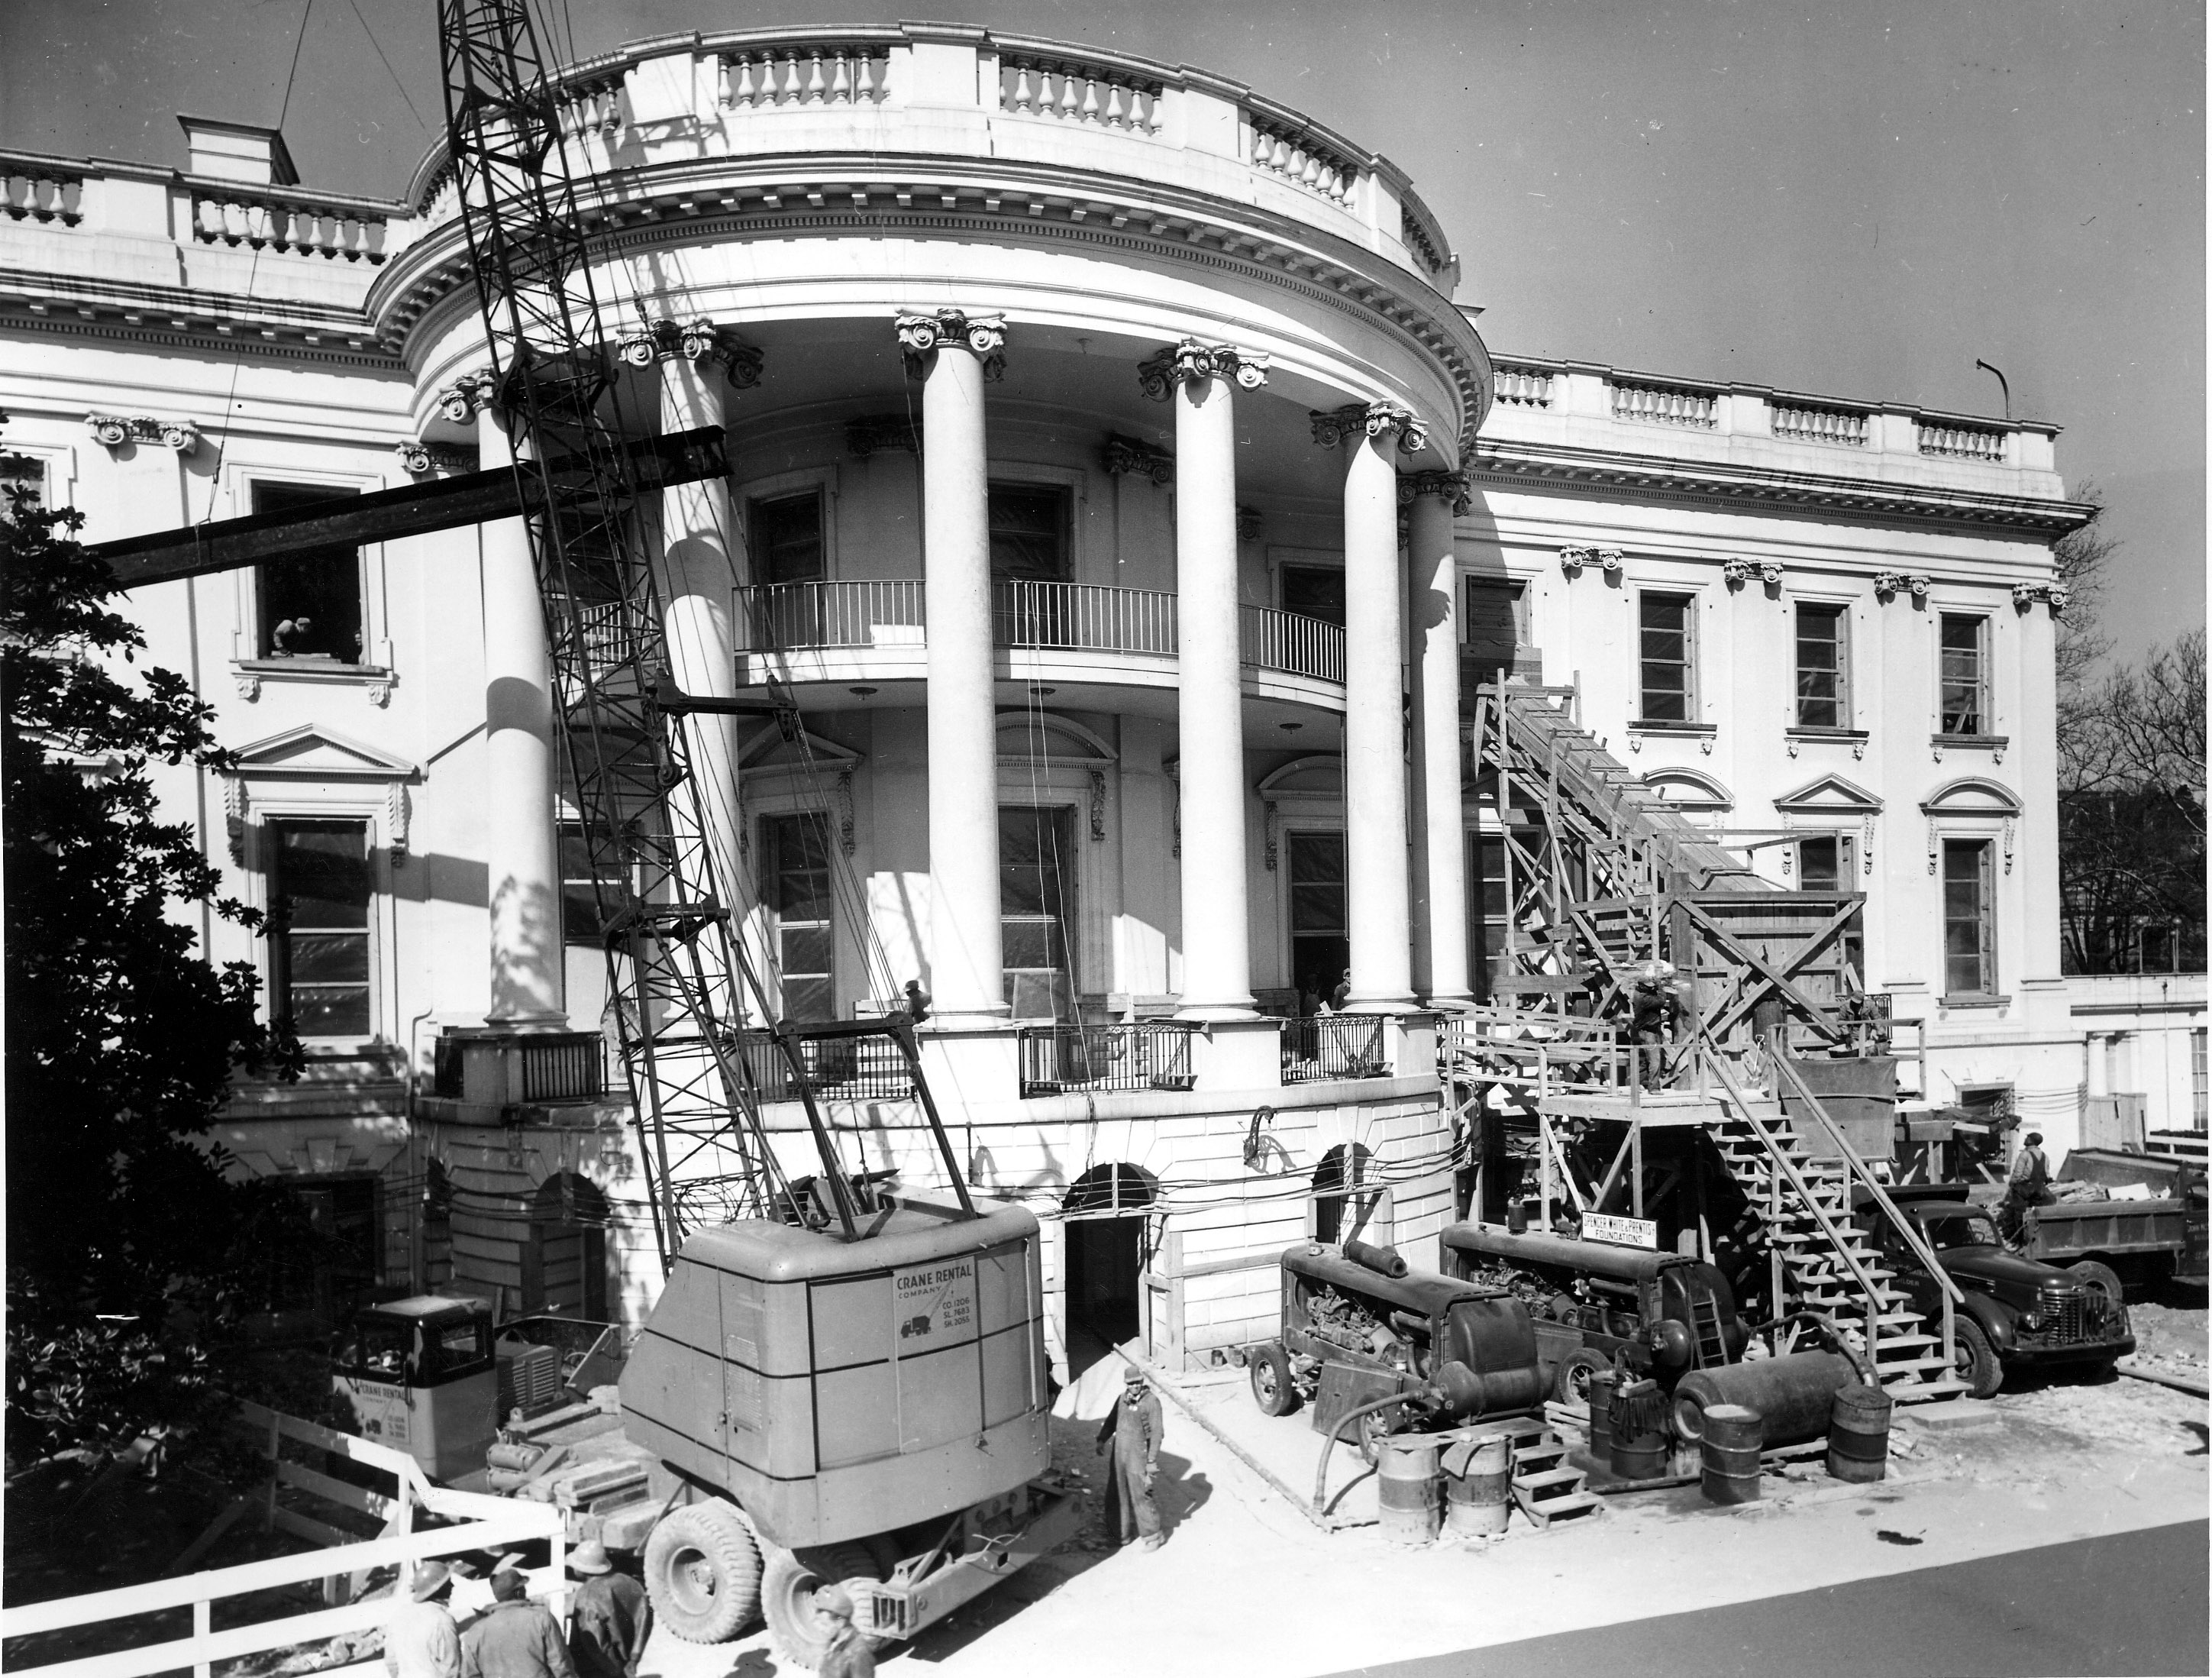 Removing debris from the renovation of the White House, on February 27, 1950. On the left, a truck crane is lifting a 40-foot beam through the southwest window of Room 20 on the second floor of the White House. On the right, debris from the hopper is being loaded on a truck. Photo from the holdings of the National Archives and Records Administration, cataloged under the National Archives Identifier (NAID) 6982091. 